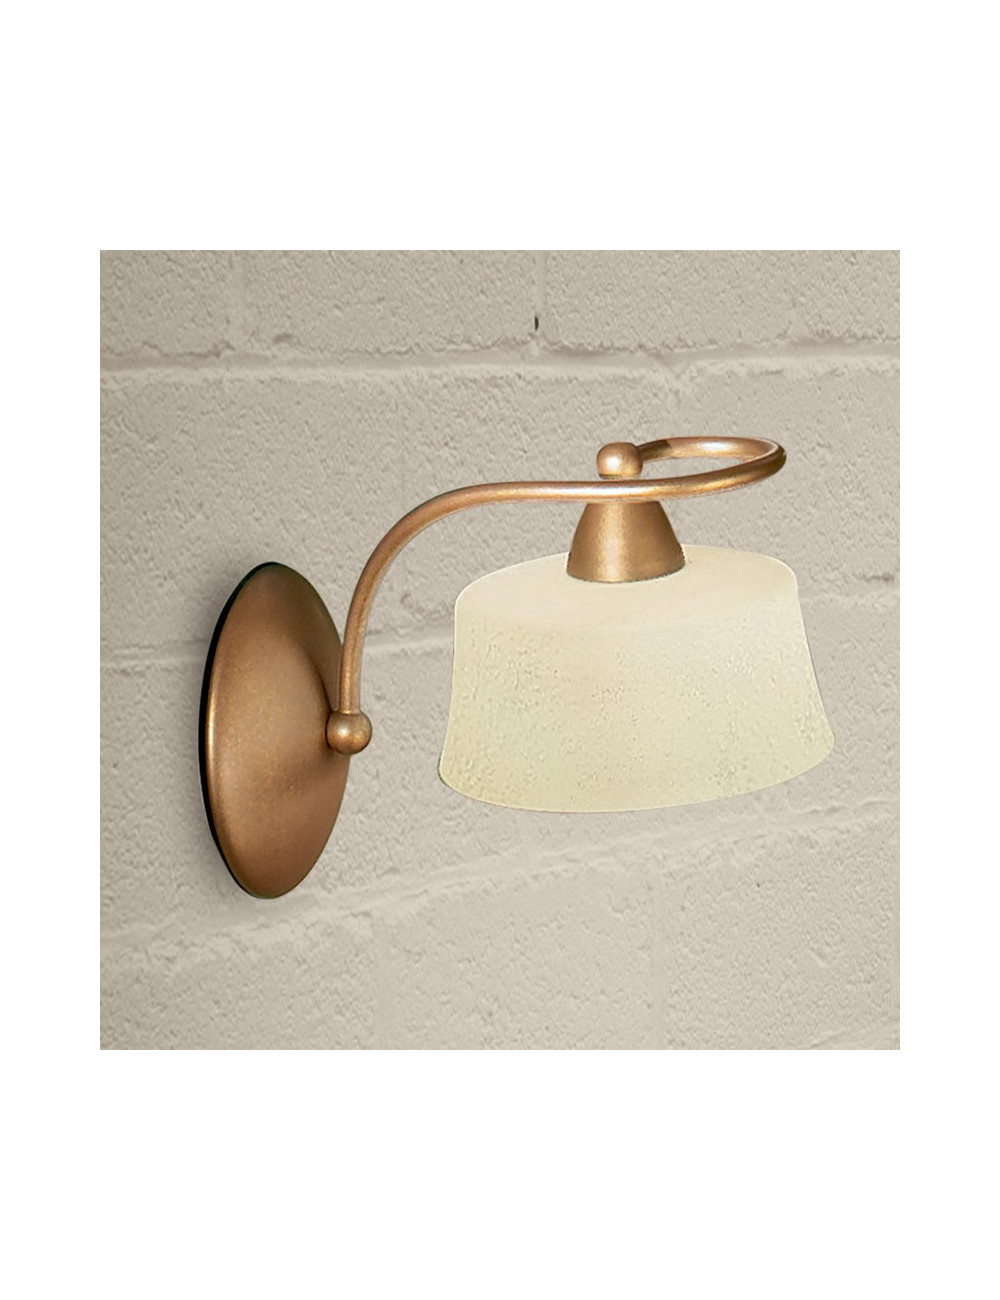 4220/1A LAM Wall Light in Rustic Style Classic Country